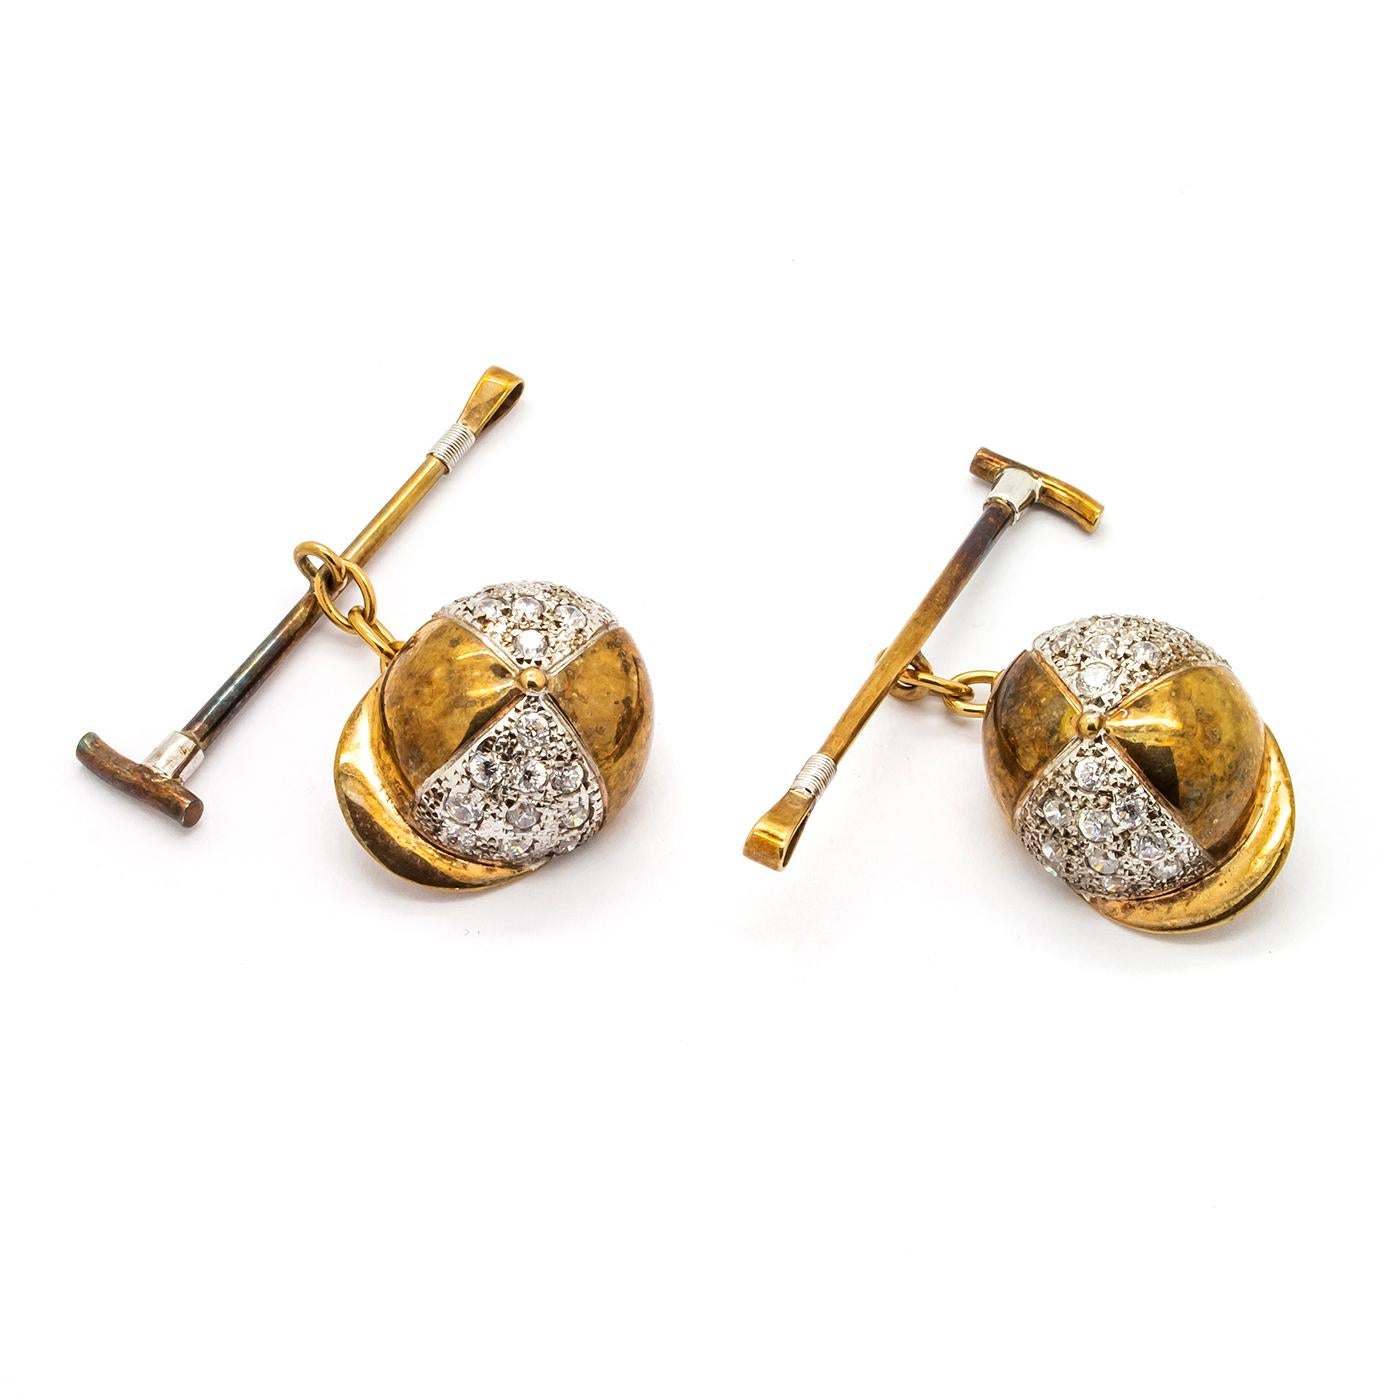 Vintage Gold and Cubic Zirconia Jockey Cufflinks, 1980 In Good Condition For Sale In London, GB